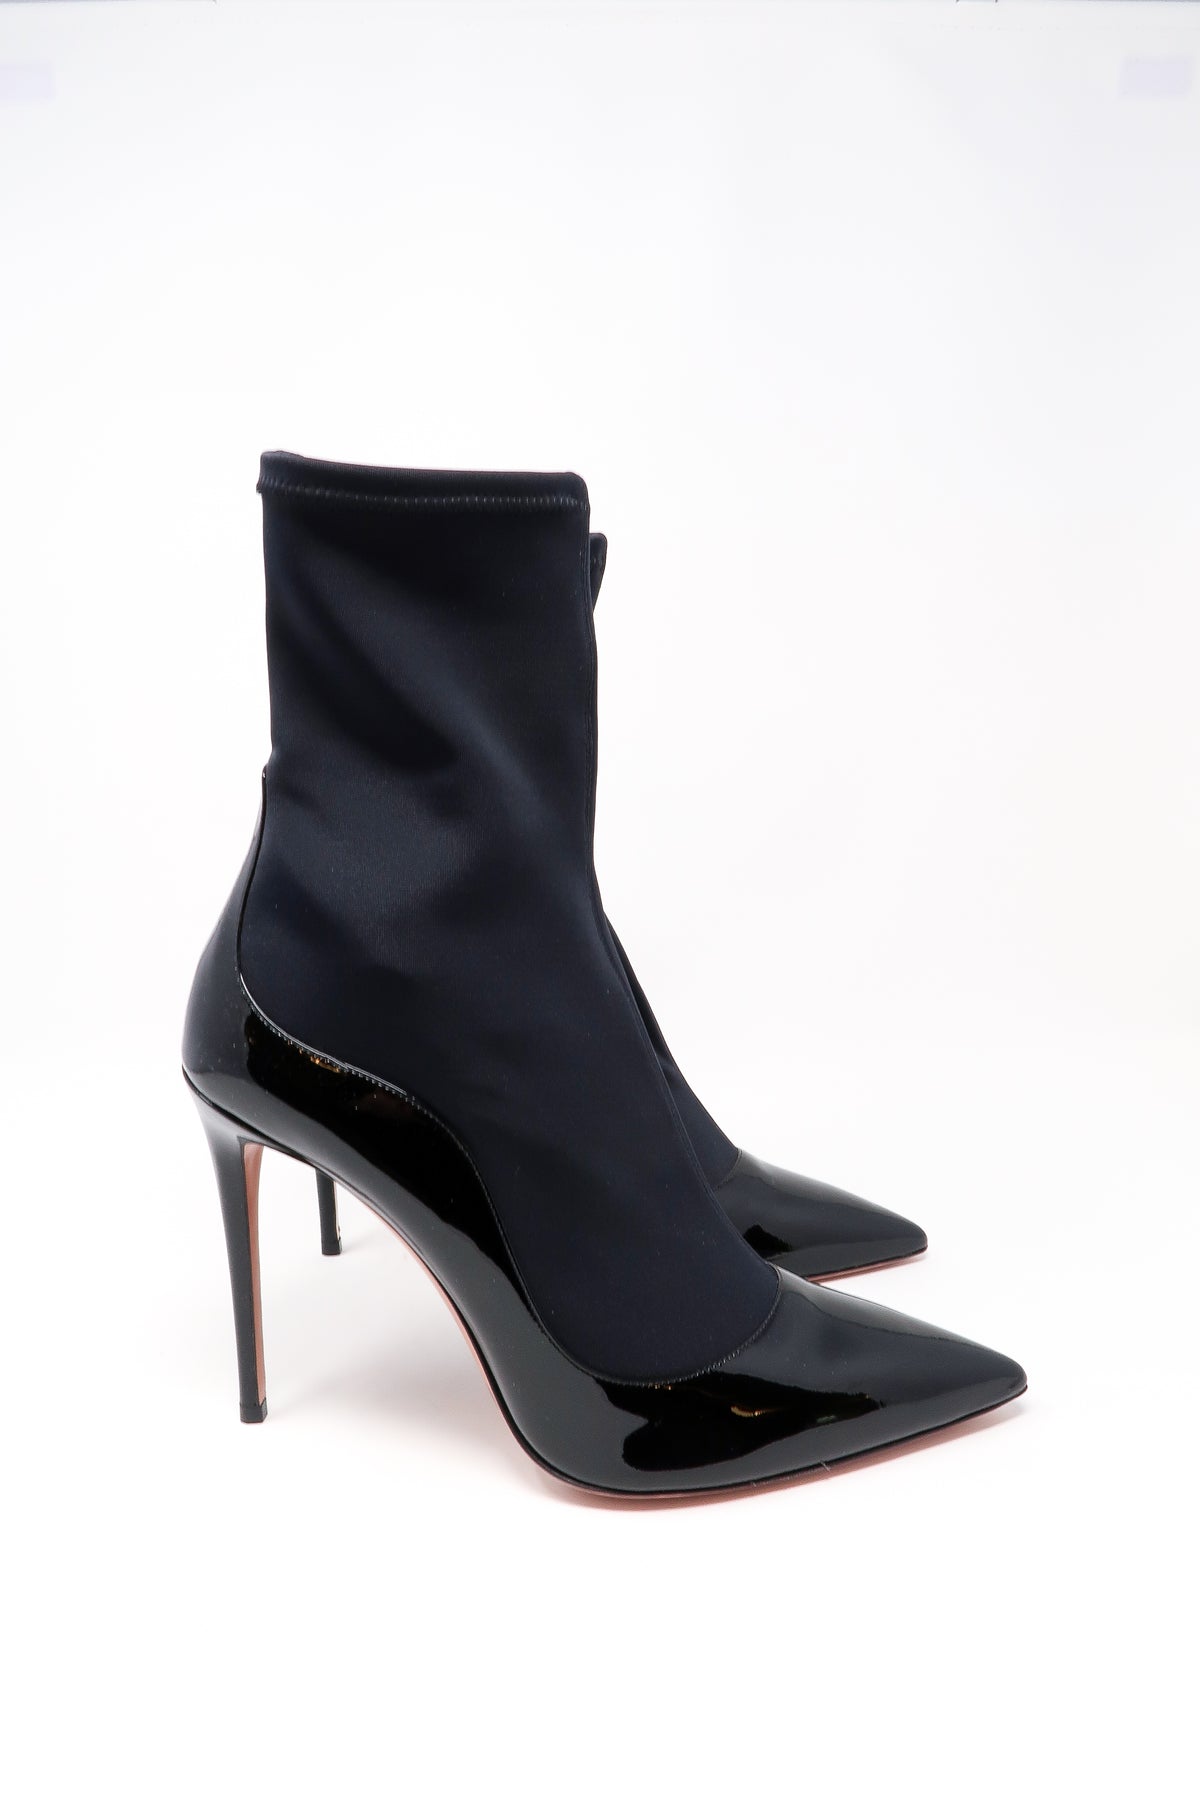 black patent leather heels with black nylon ankle socket attachment (side view)